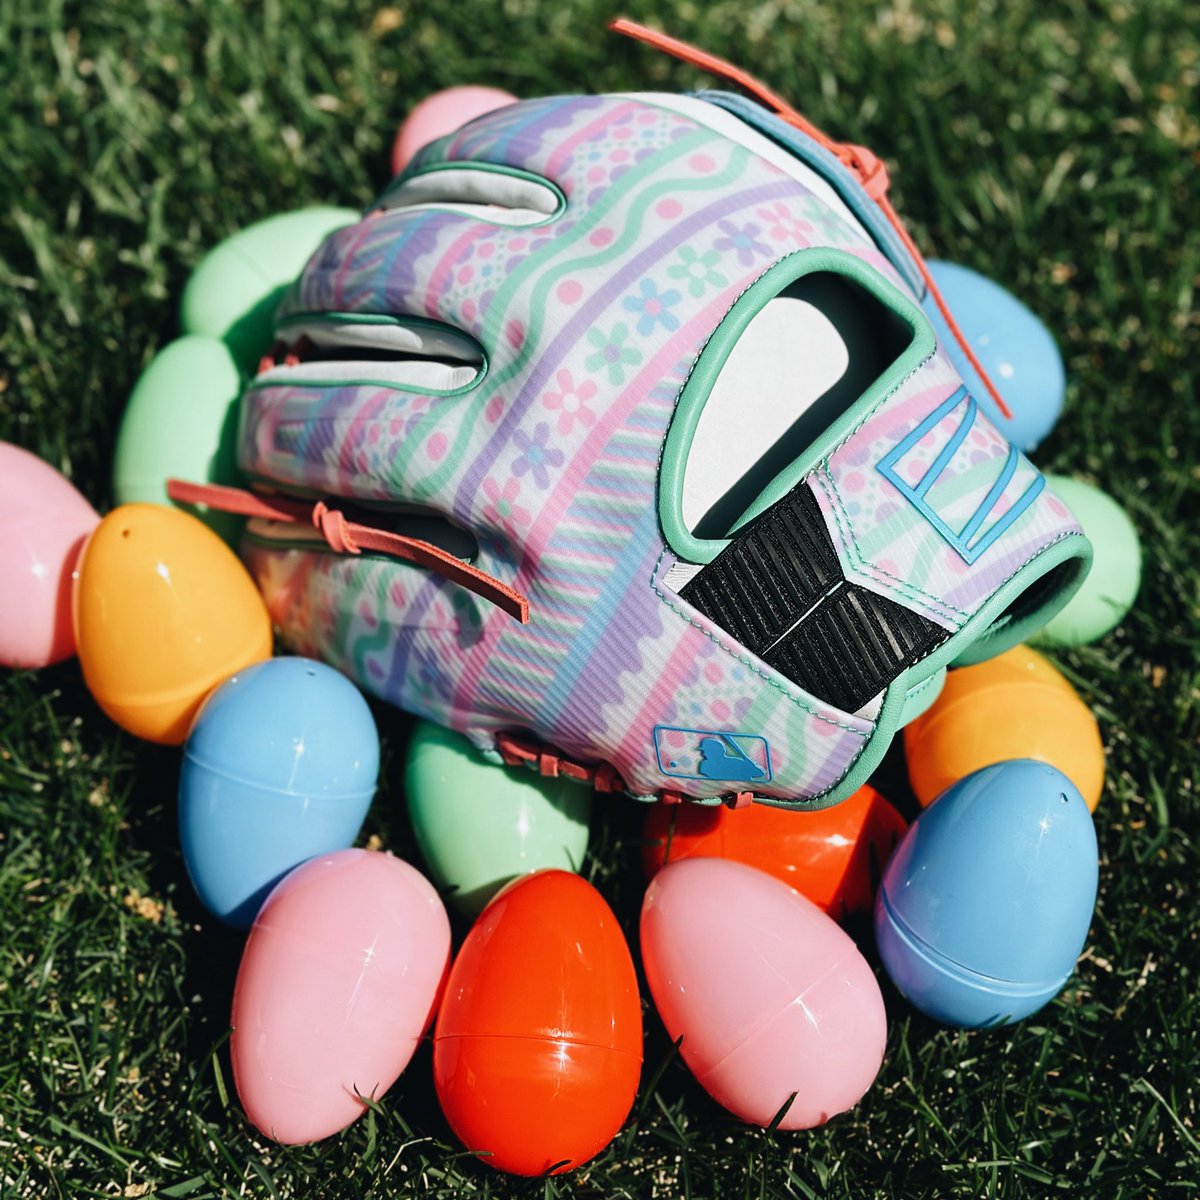 ICYMI: The Easter bunny dropped an exclusive Easter themed REV1X yesterday 🐰 Shop now on Rawlings.com!